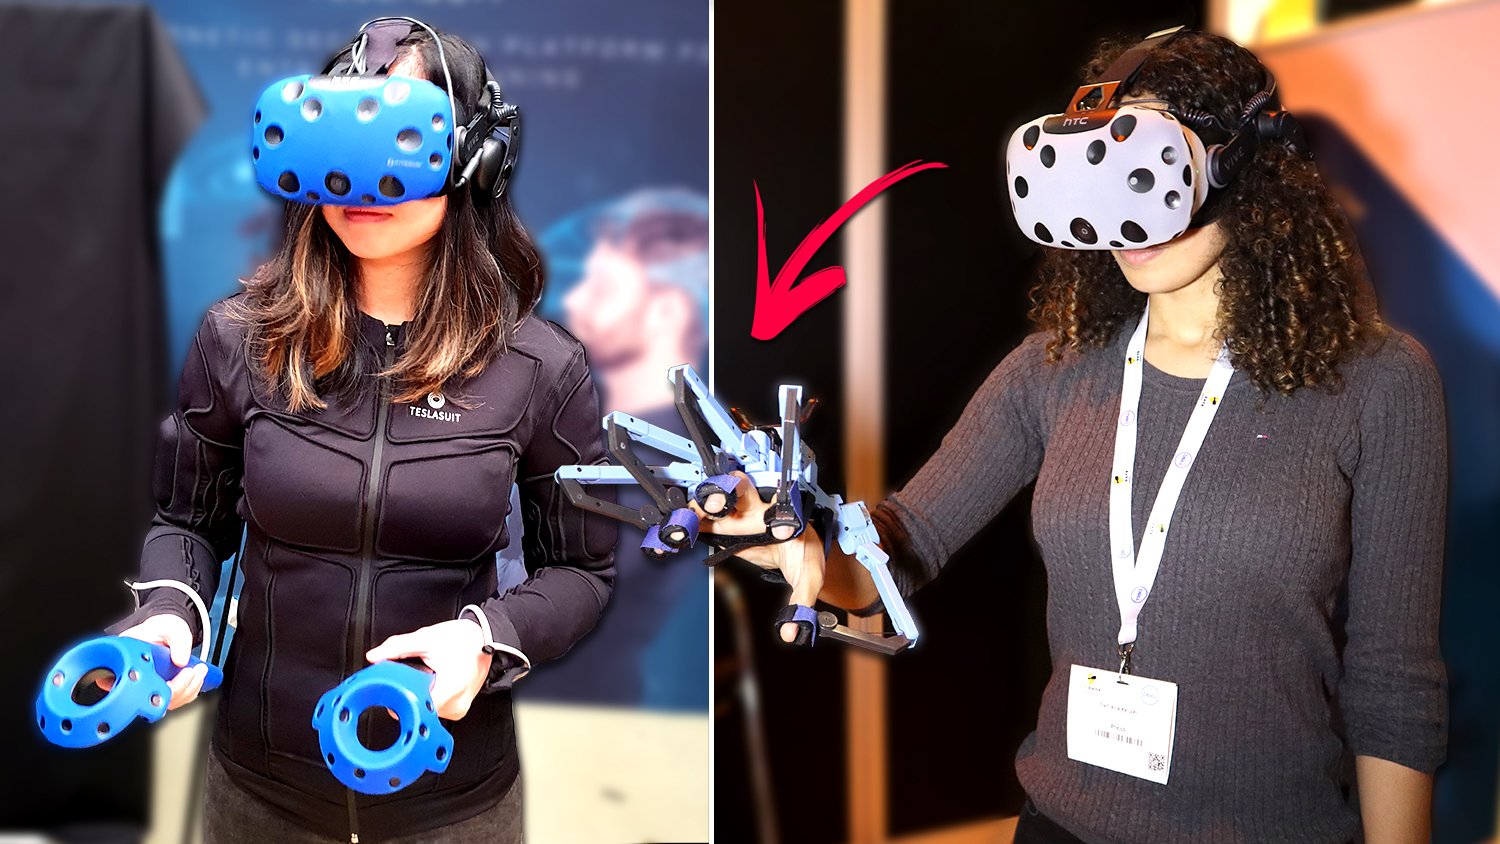 Cas and Chary VR on Twitter: "We went to #VRDays and we tried out three VR peripherals: Sense Glove, Teslasuit and Two different #VR gloves and one haptic suit. What